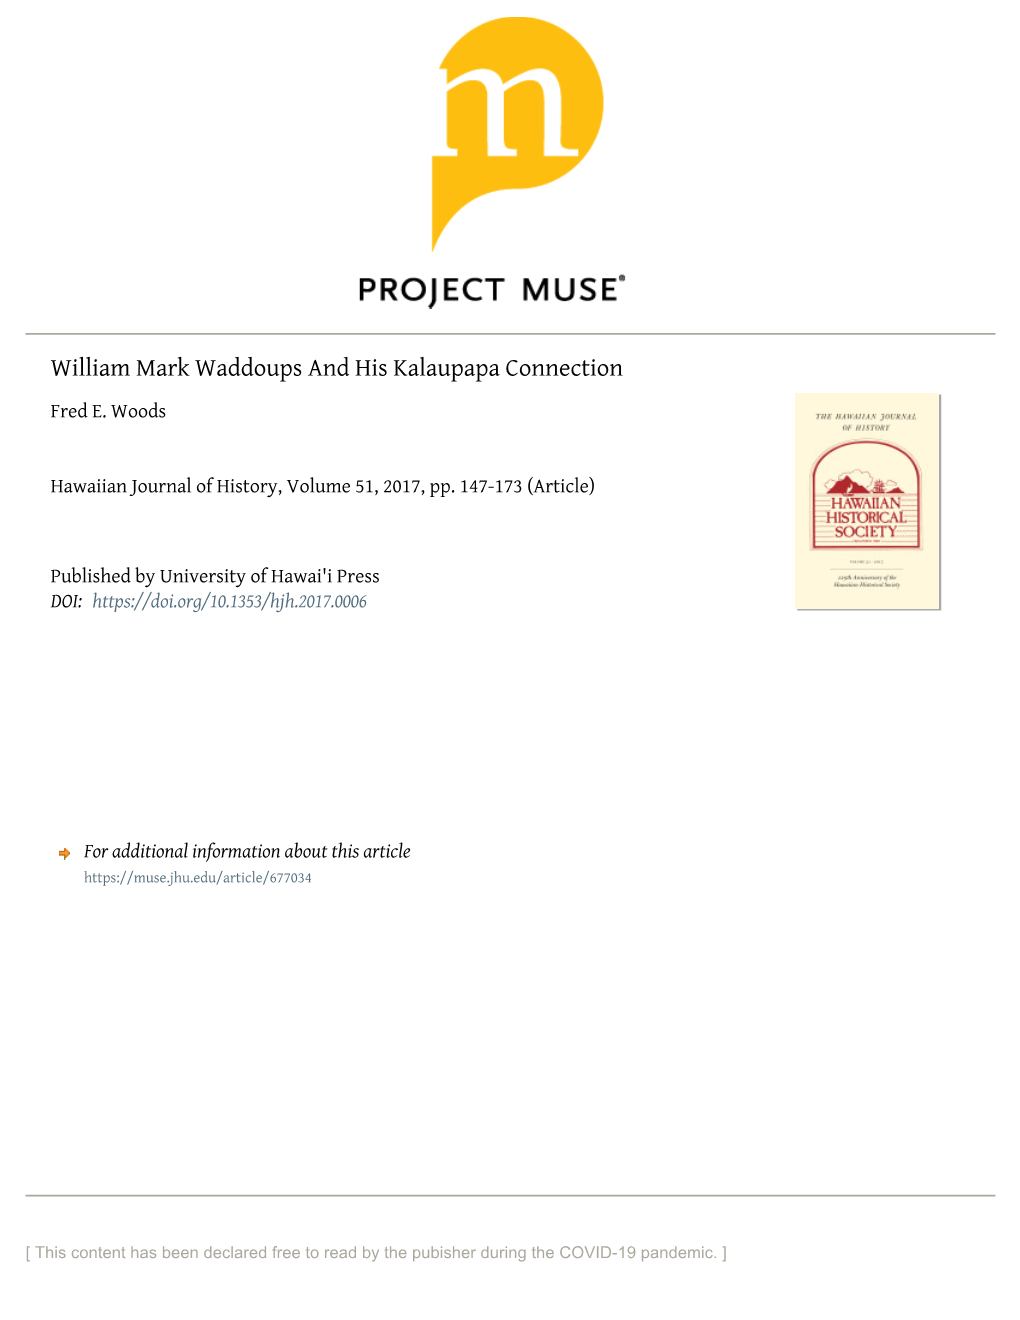 William Mark Waddoups and His Kalaupapa Connection Fred E